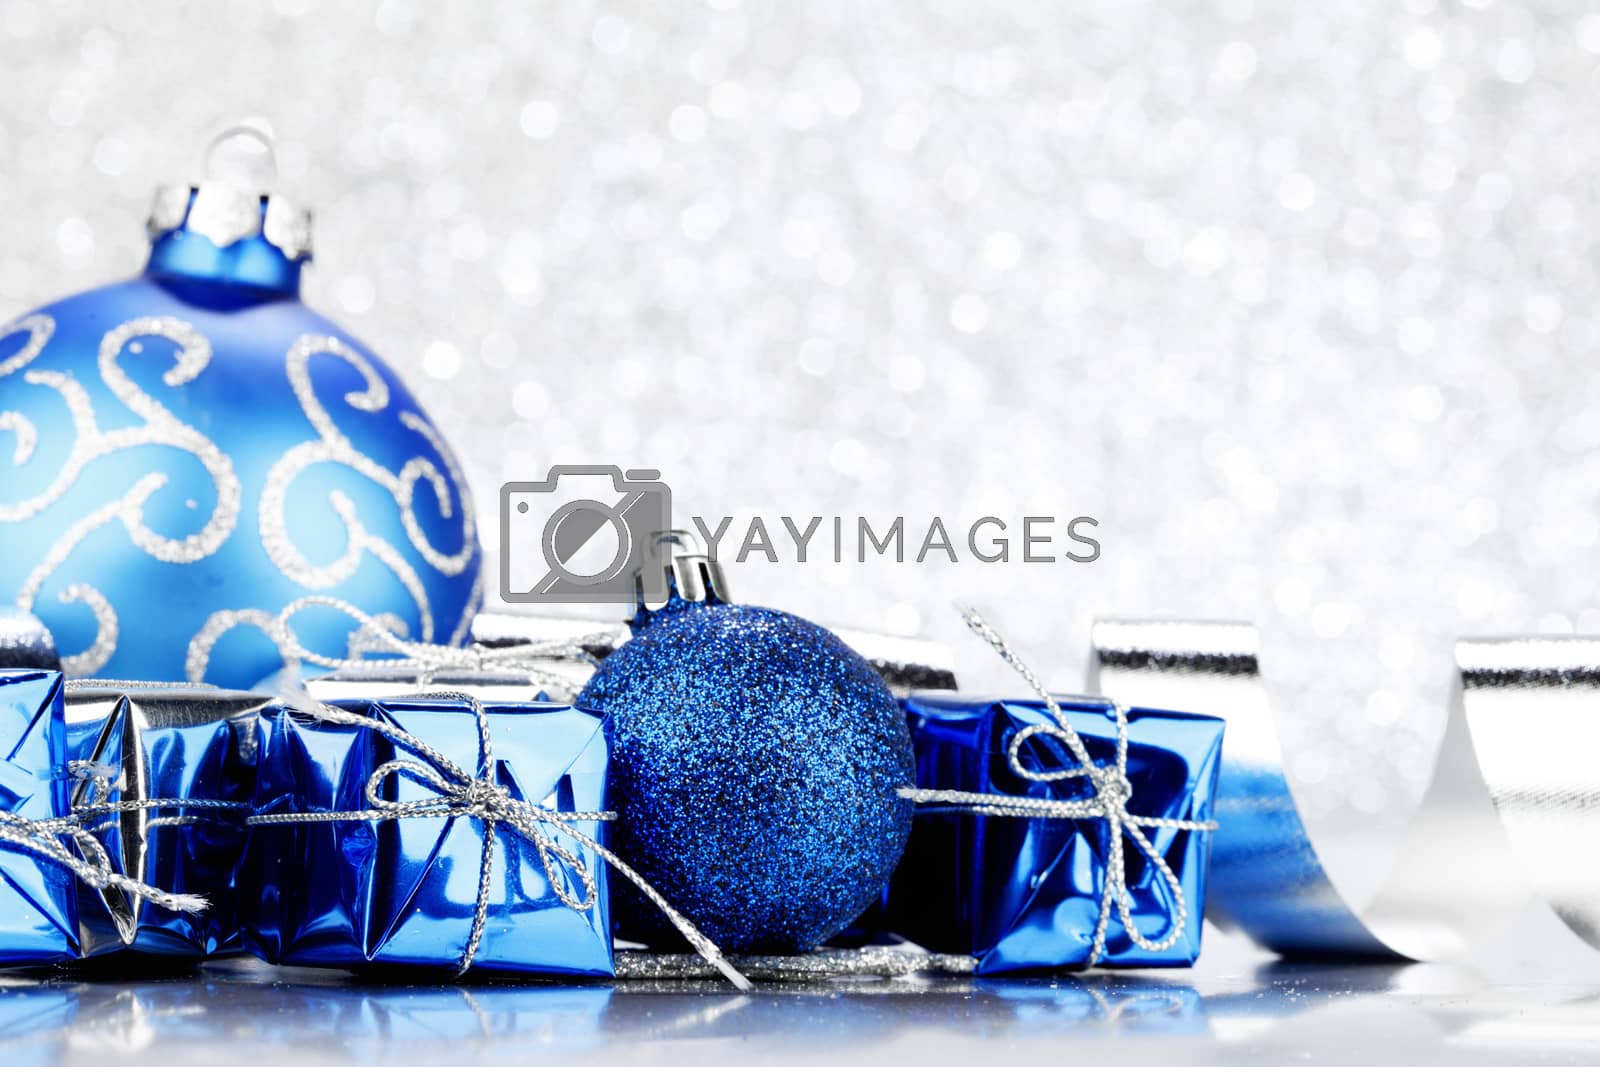 Royalty free image of Christmas gifts and decoration by Yellowj